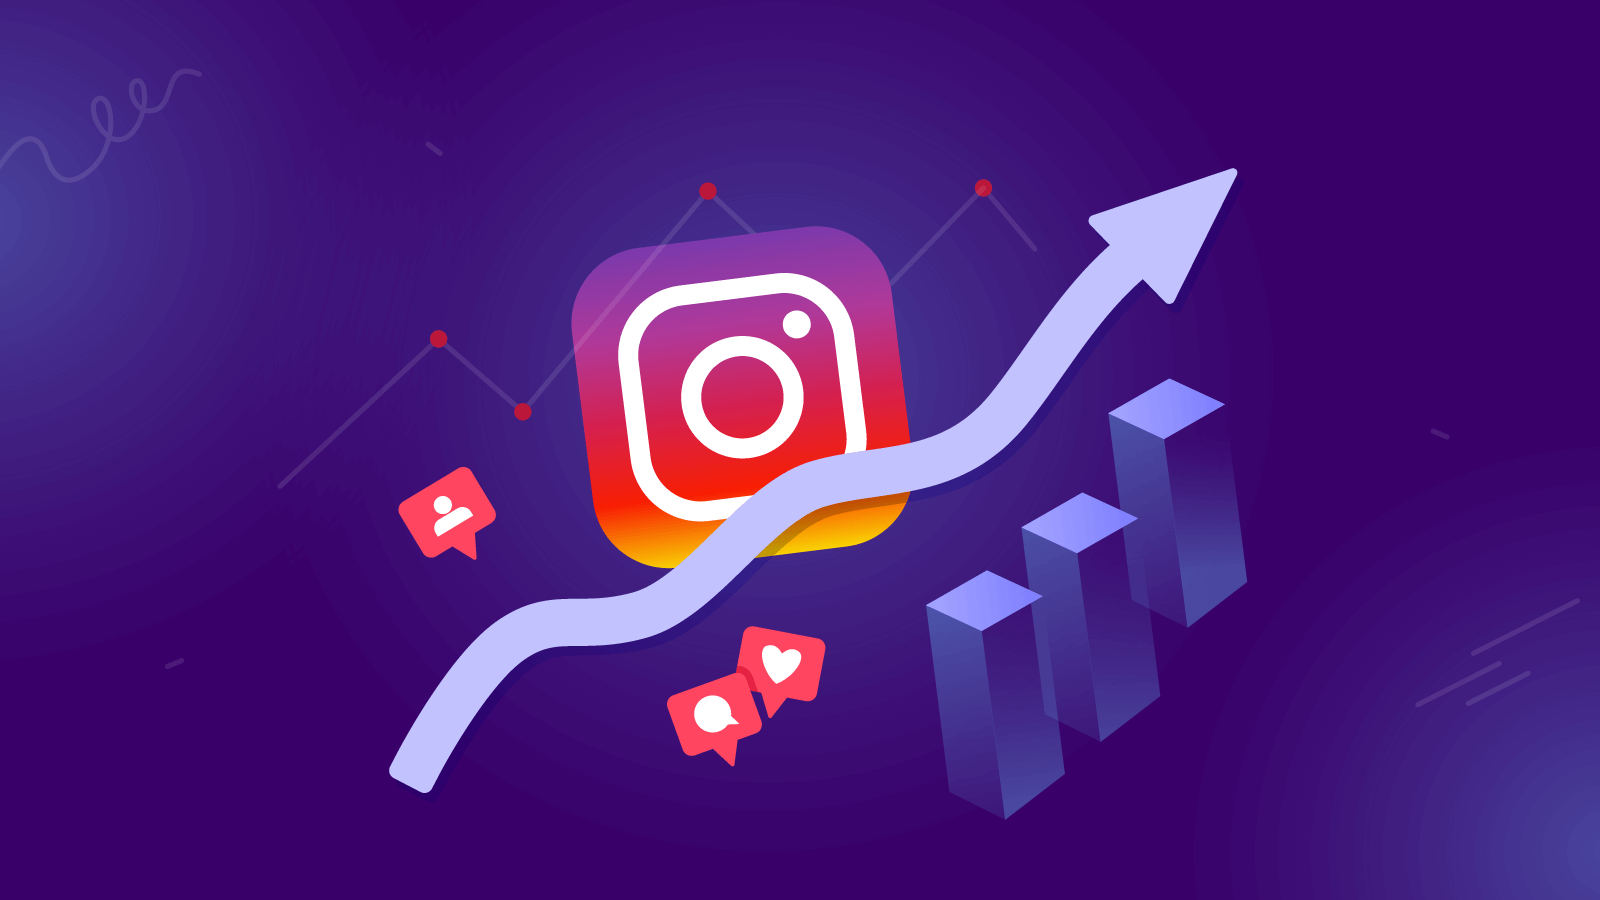 how to get more followers on instagram, instagram marketing agency india, instagram advertising companies, who has more followers in instagram, instagram promotion services, instagram promotion cost india, instagram ads cost india, best instagram promotion services, paid promotion on instagram, instagram marketing company india